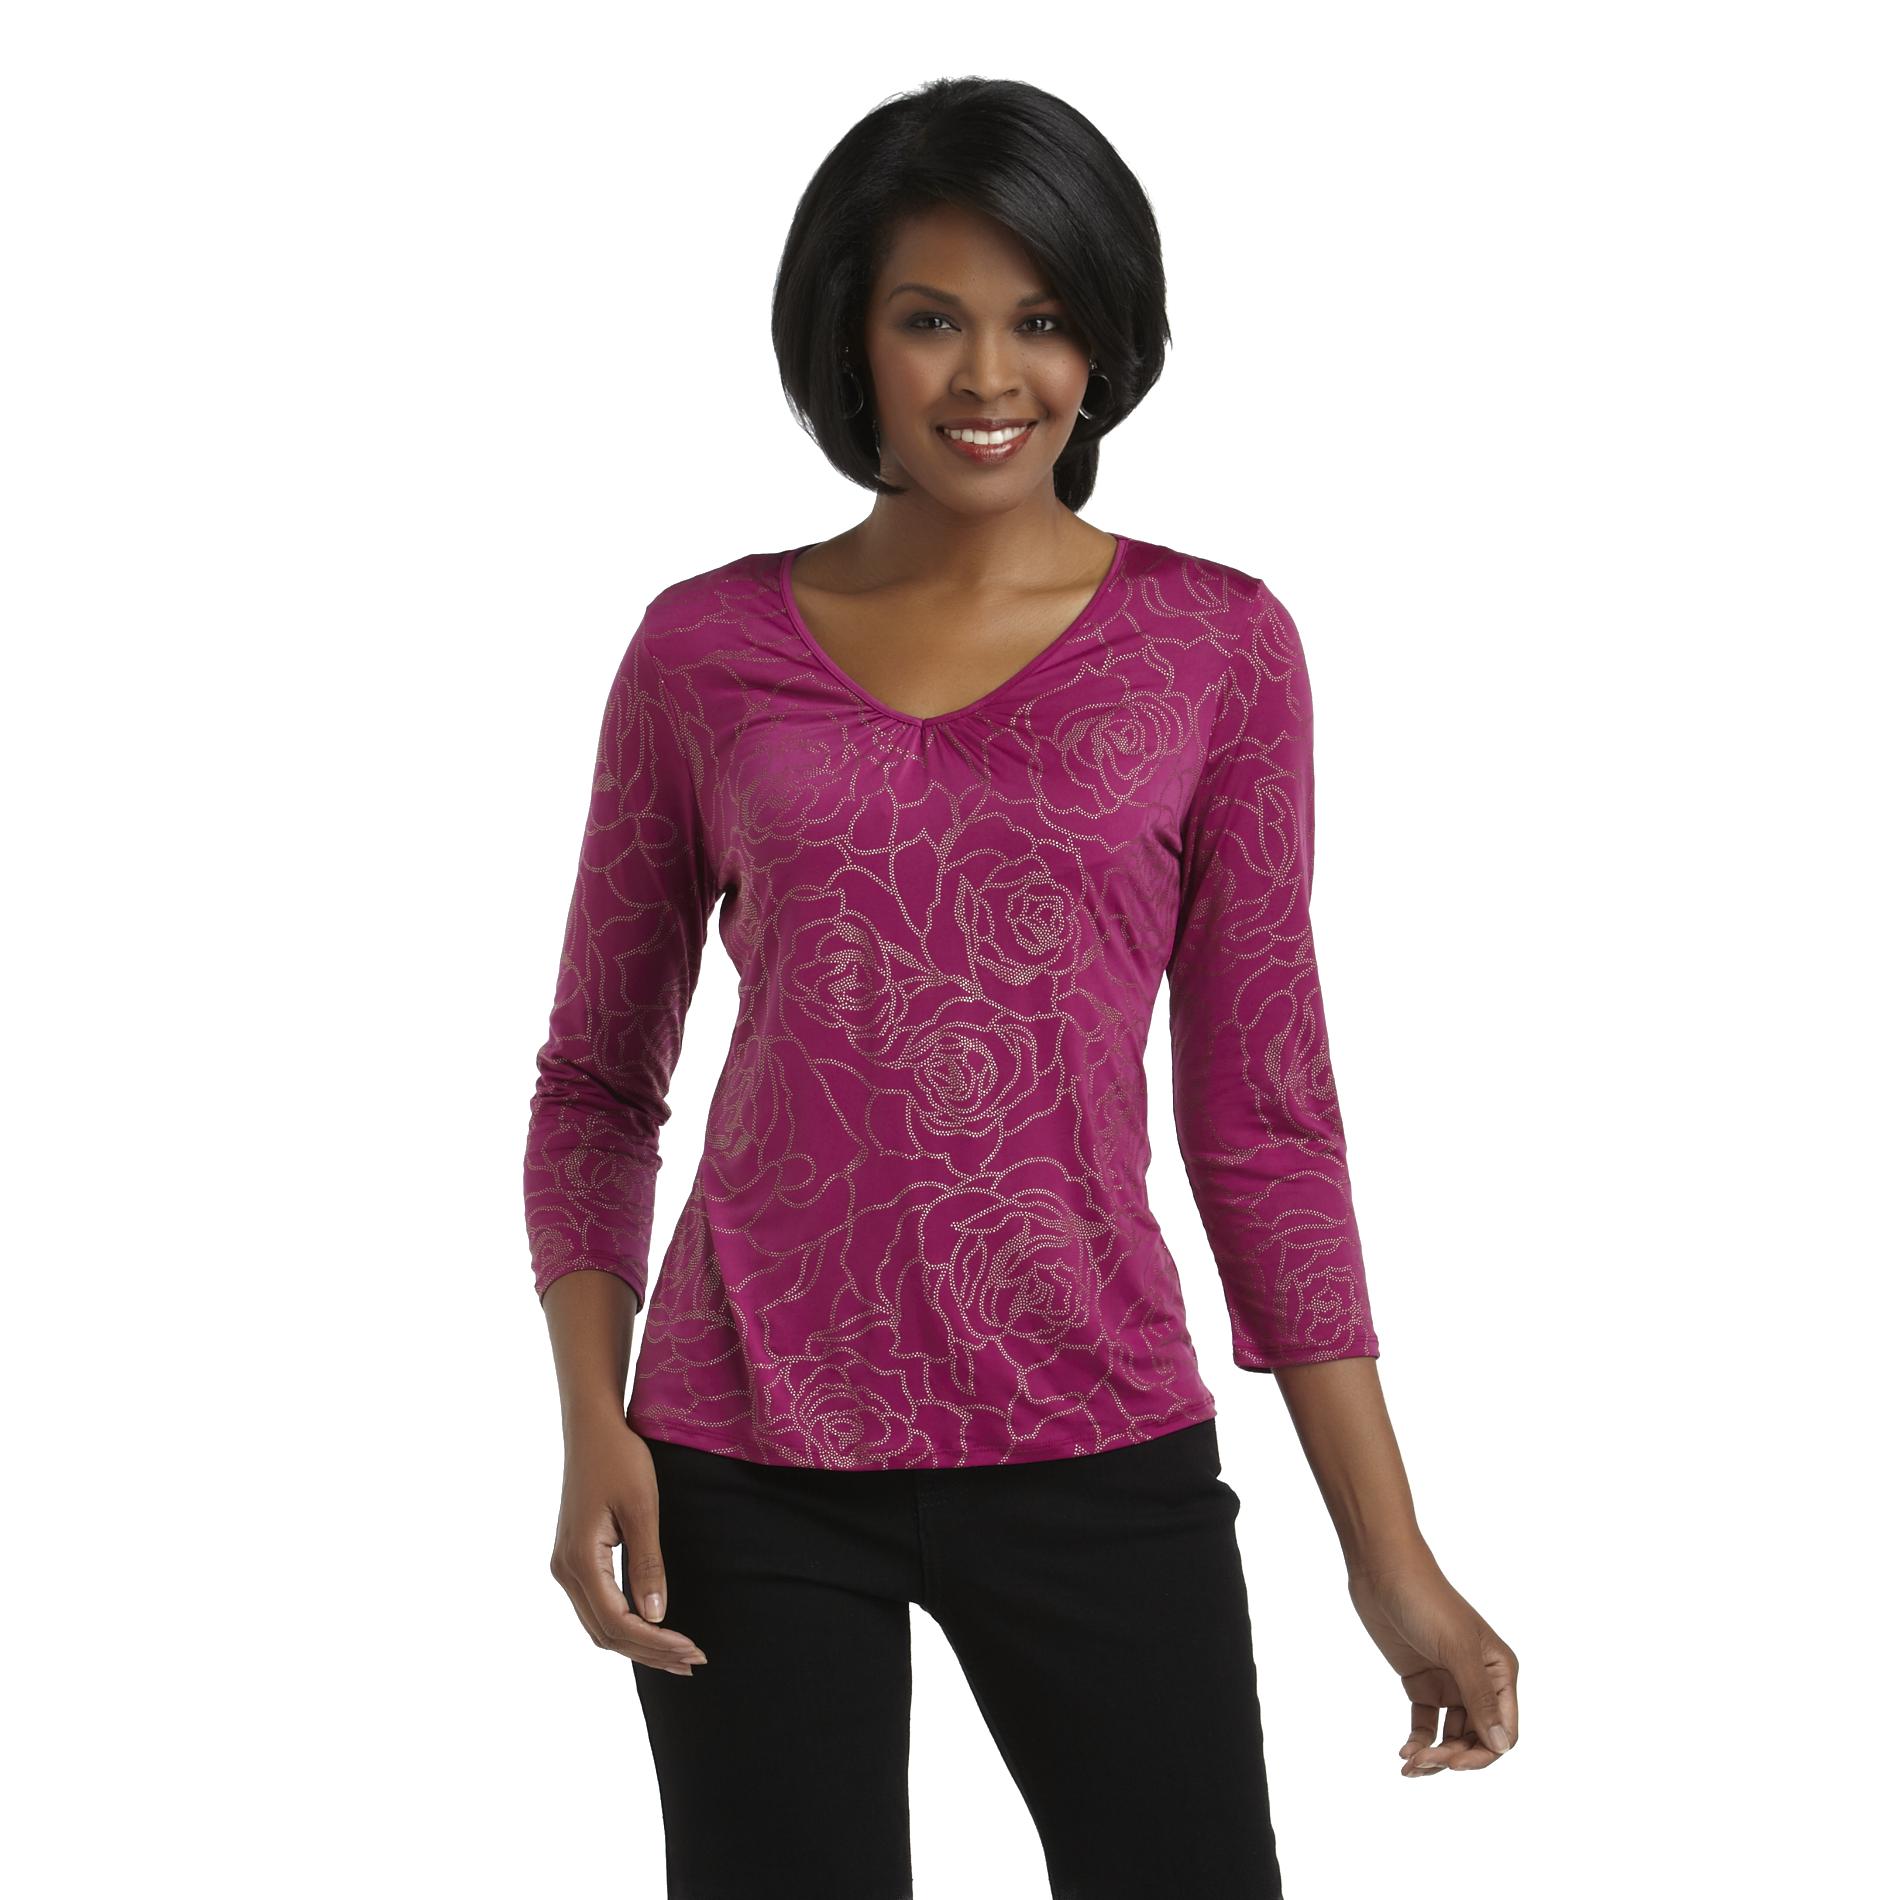 Jaclyn Smith Women's Studded Knit Top - Floral